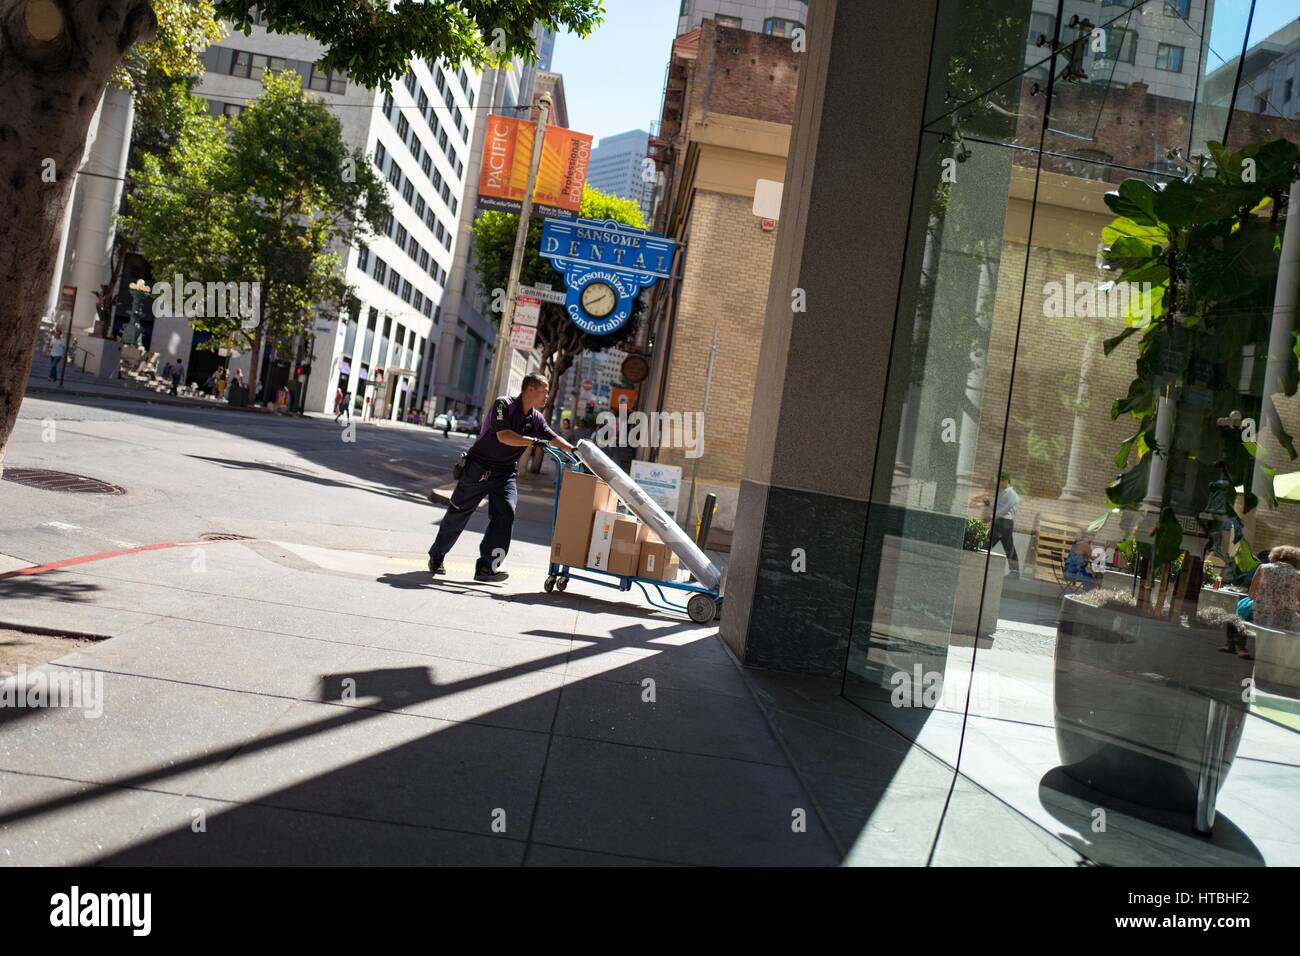 In the Financial District neighborhood of San Francisco, California, a Fedex delivery person pushes a cart loaded with parcels towards the entrance of a glass walled office building, September 26, 2016. Stock Photo